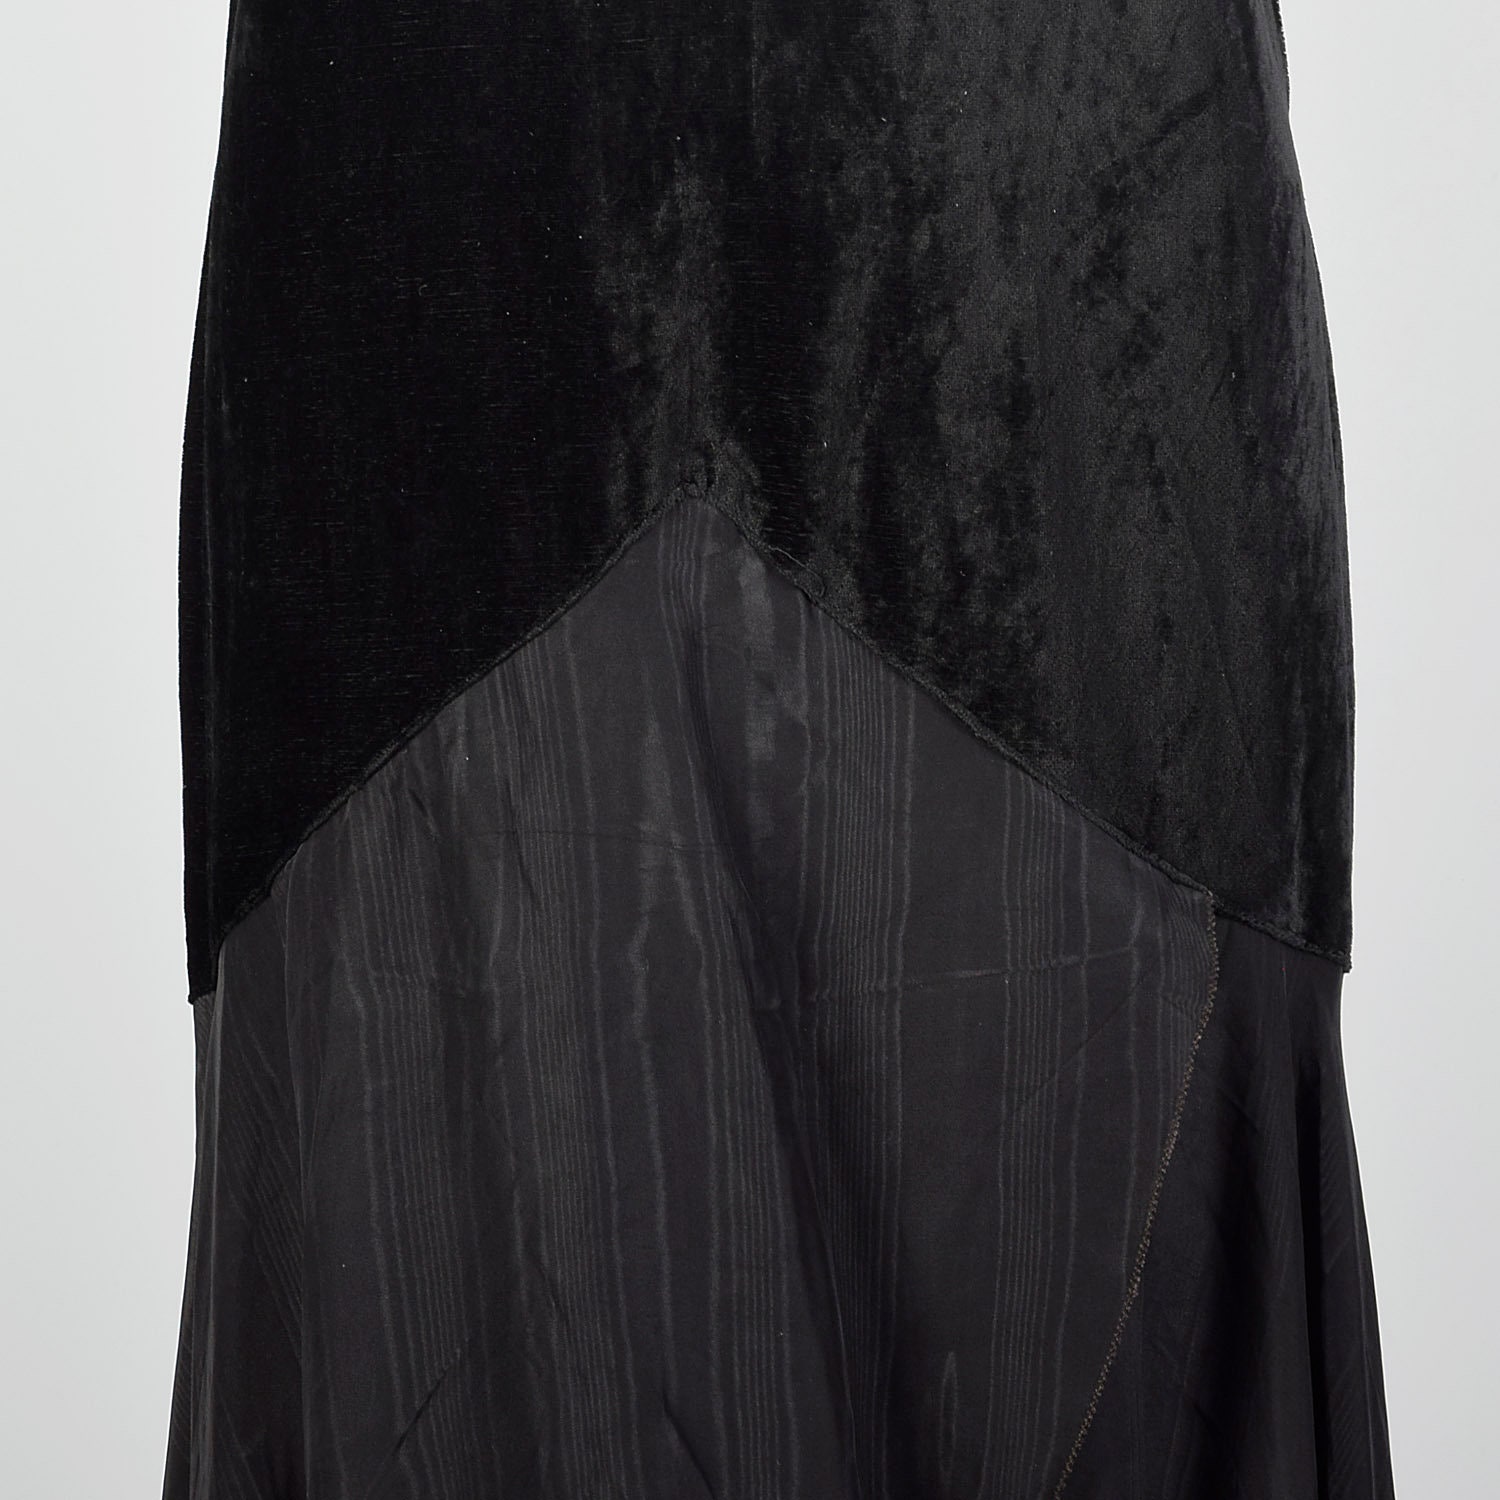 XS 1930s Drop Waist Velvet and Moire Silk Evening Sultry Dress - Etsy